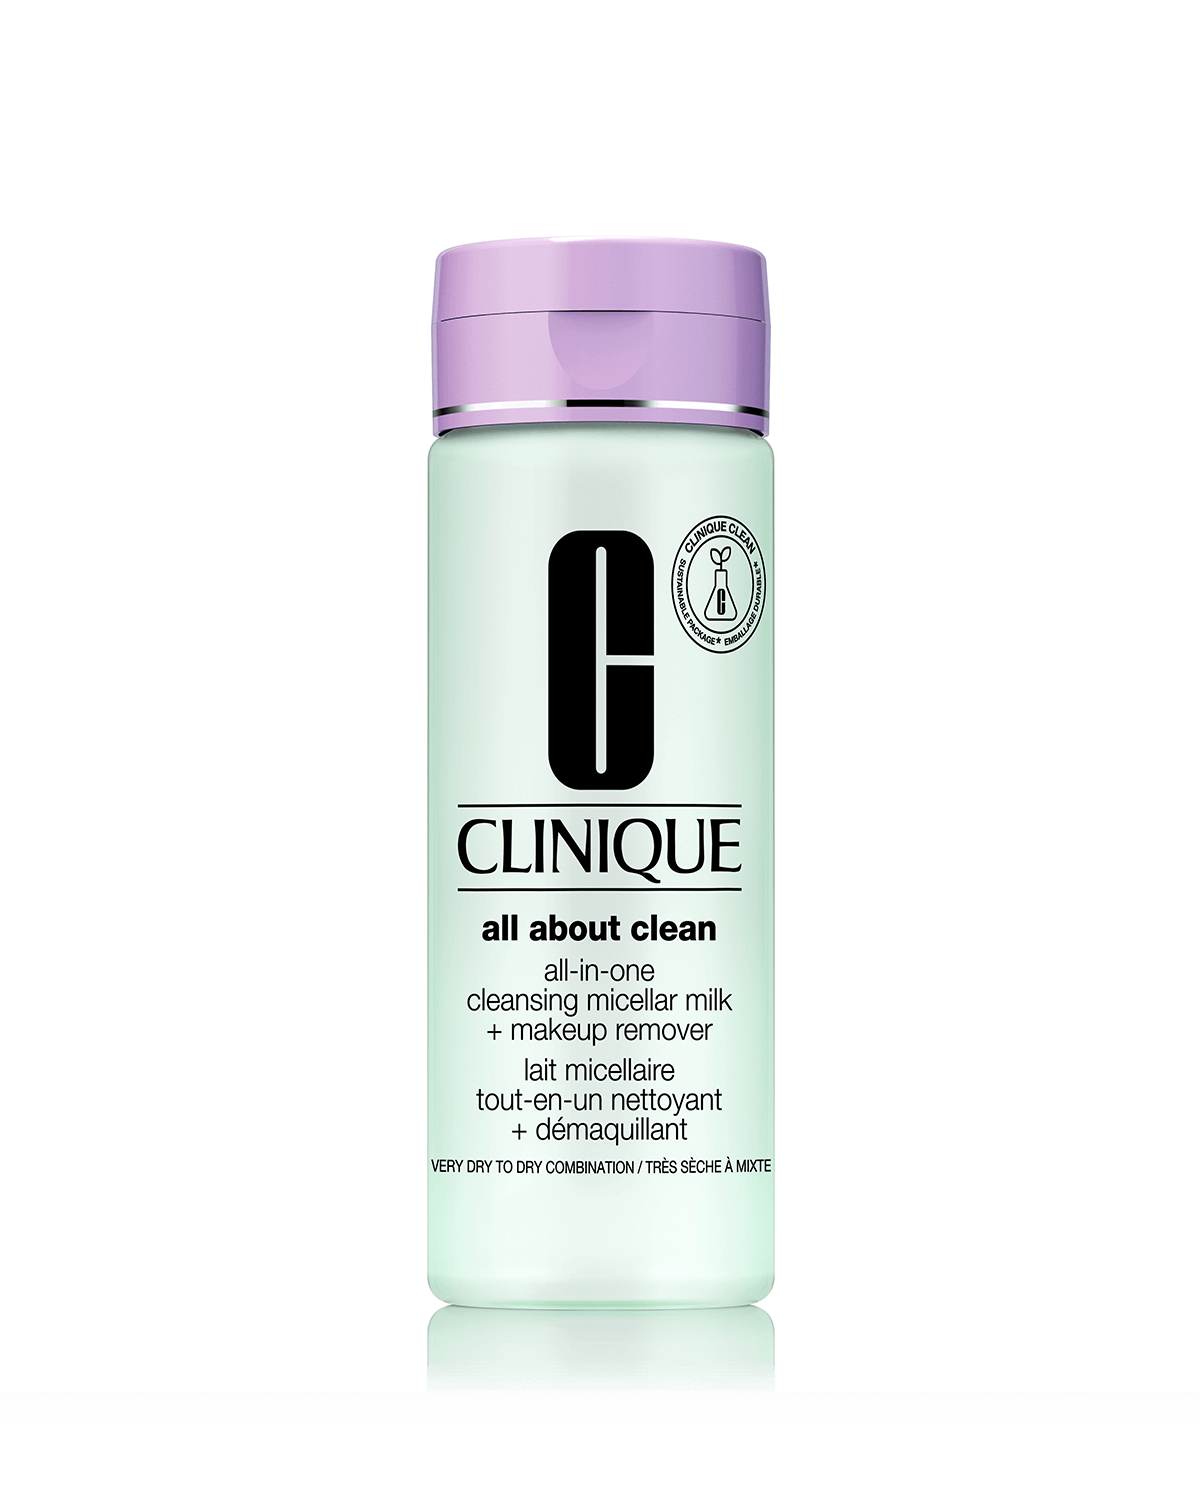 Full-size All-in-One Cleansing Micellar Milk + Makeup Remover